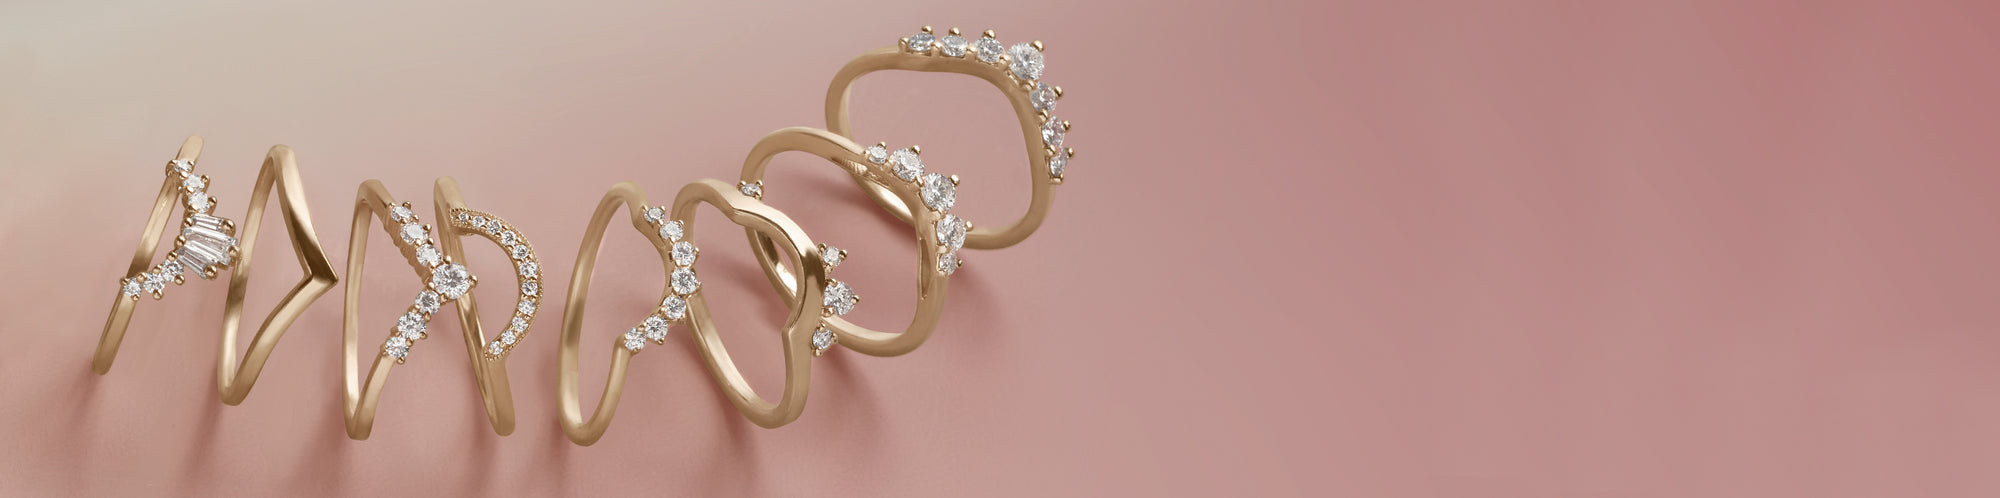 A cascade of white diamond bands set in yellow gold in different silhouettes on a pink background.